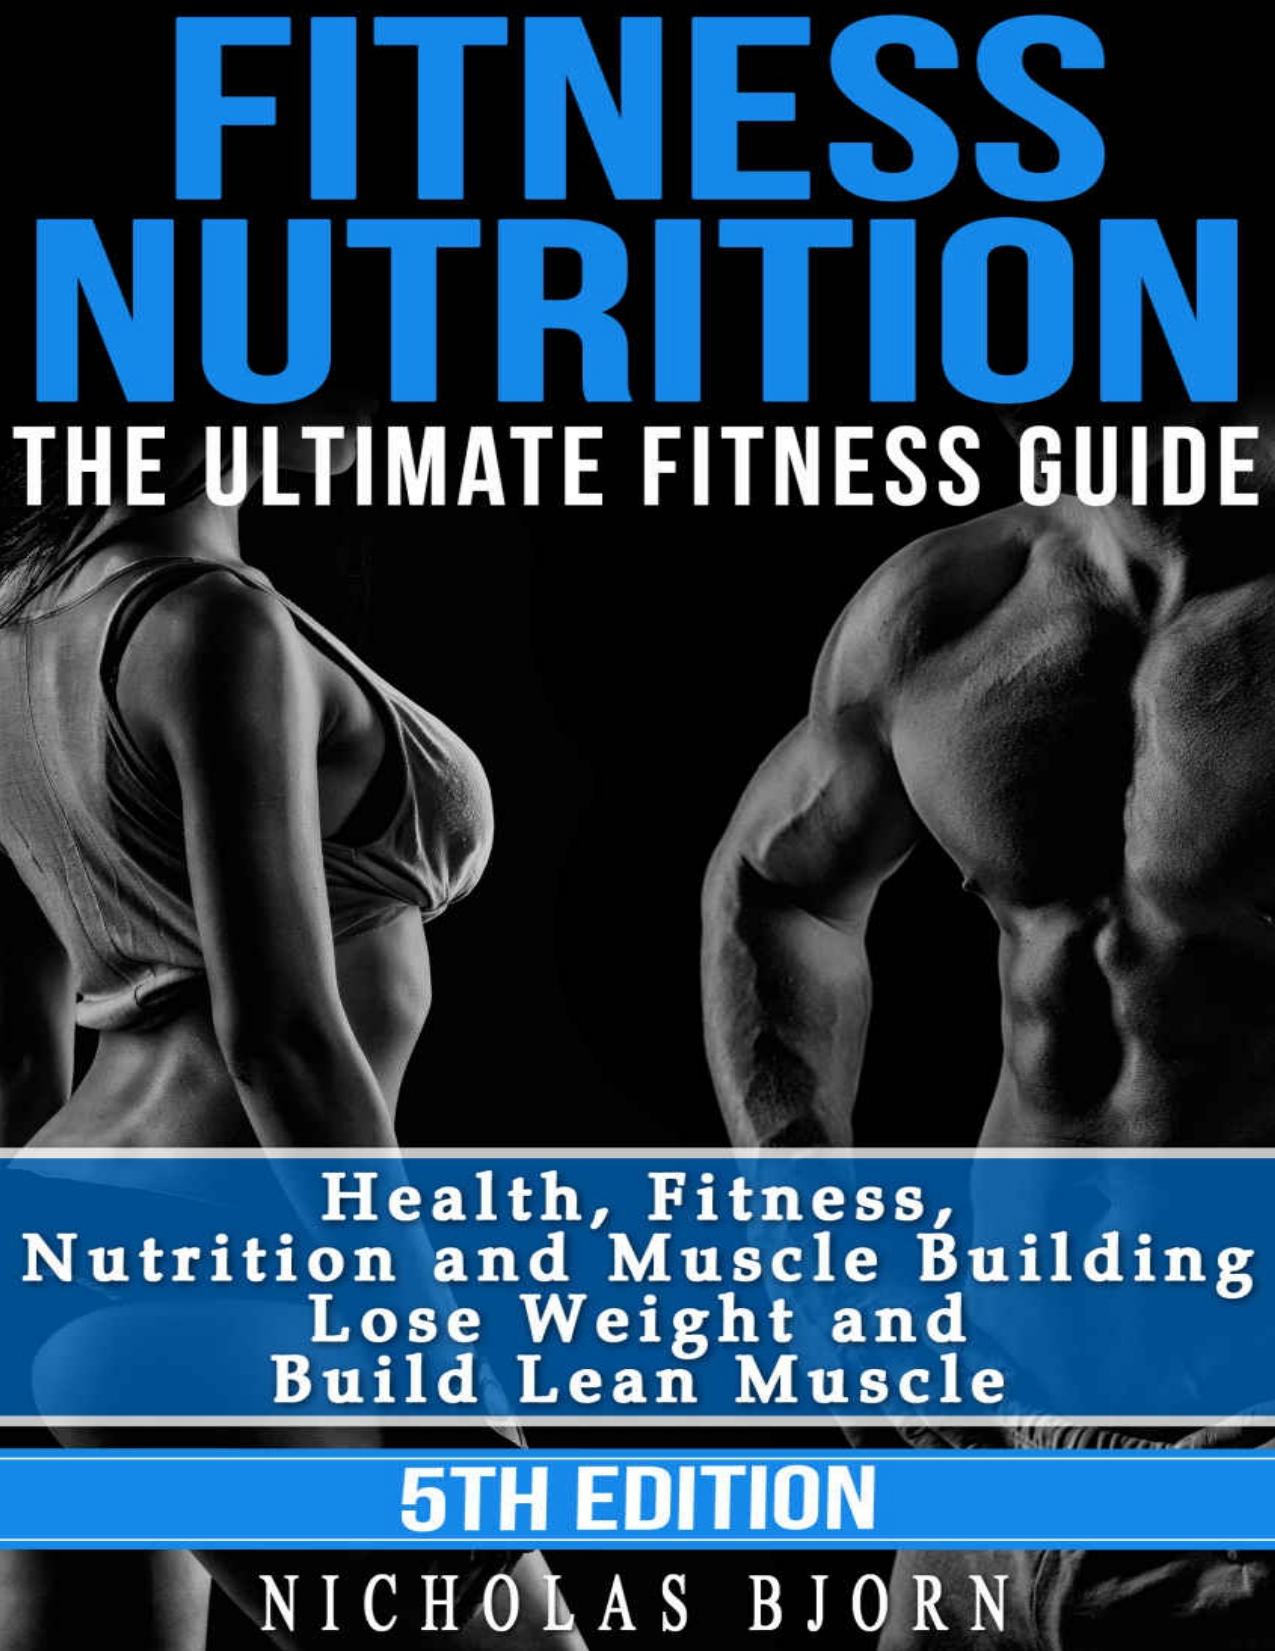 Fitness Nutrition: The Ultimate Fitness Guide: Health, Fitness, Nutrition and Muscle Building - Lose Weight and Build Lean Muscle (Muscle Building Series Book 1) by Nicholas Bjorn